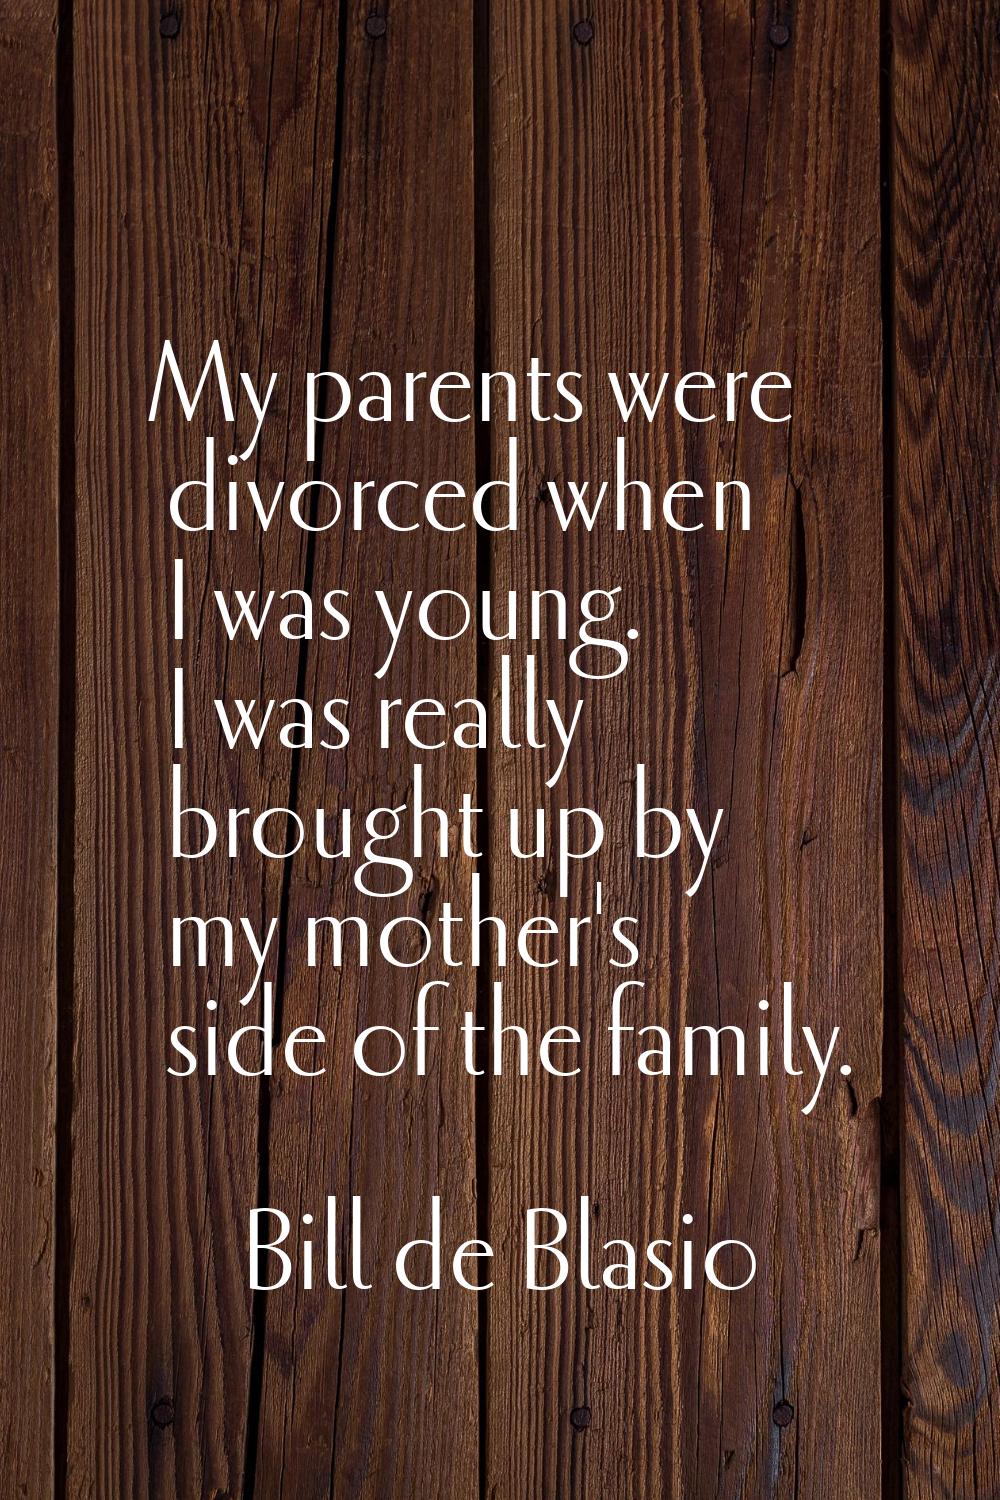 My parents were divorced when I was young. I was really brought up by my mother's side of the famil